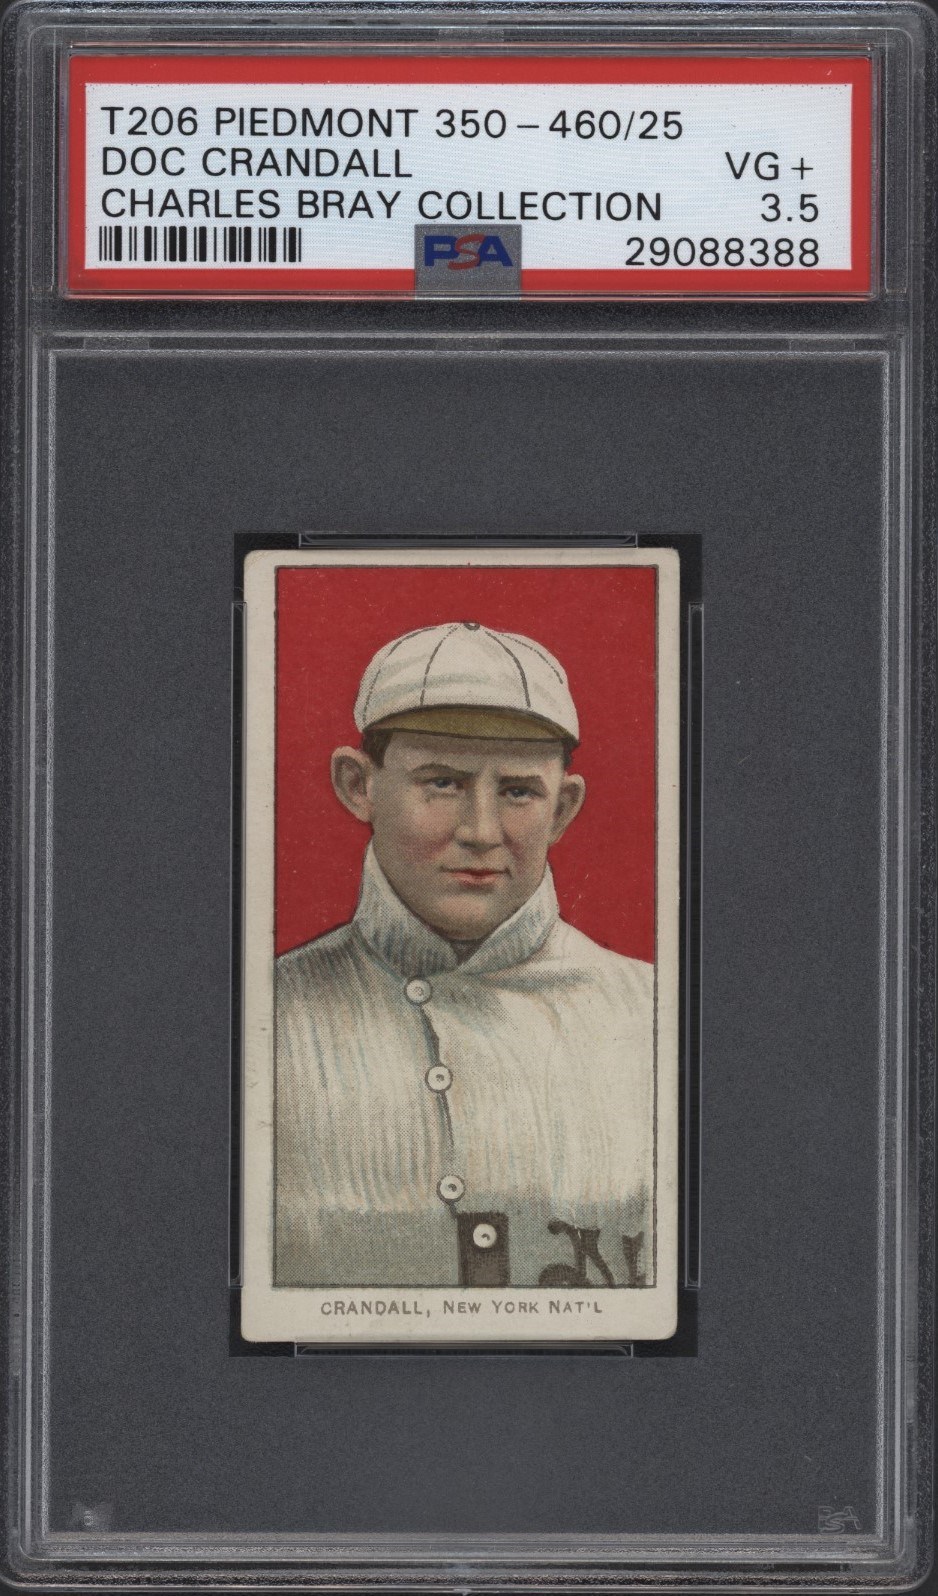 - T206 Piedmont 350-460/25 Doc Crandall PSA 3.5 From the Charles Bray Collection